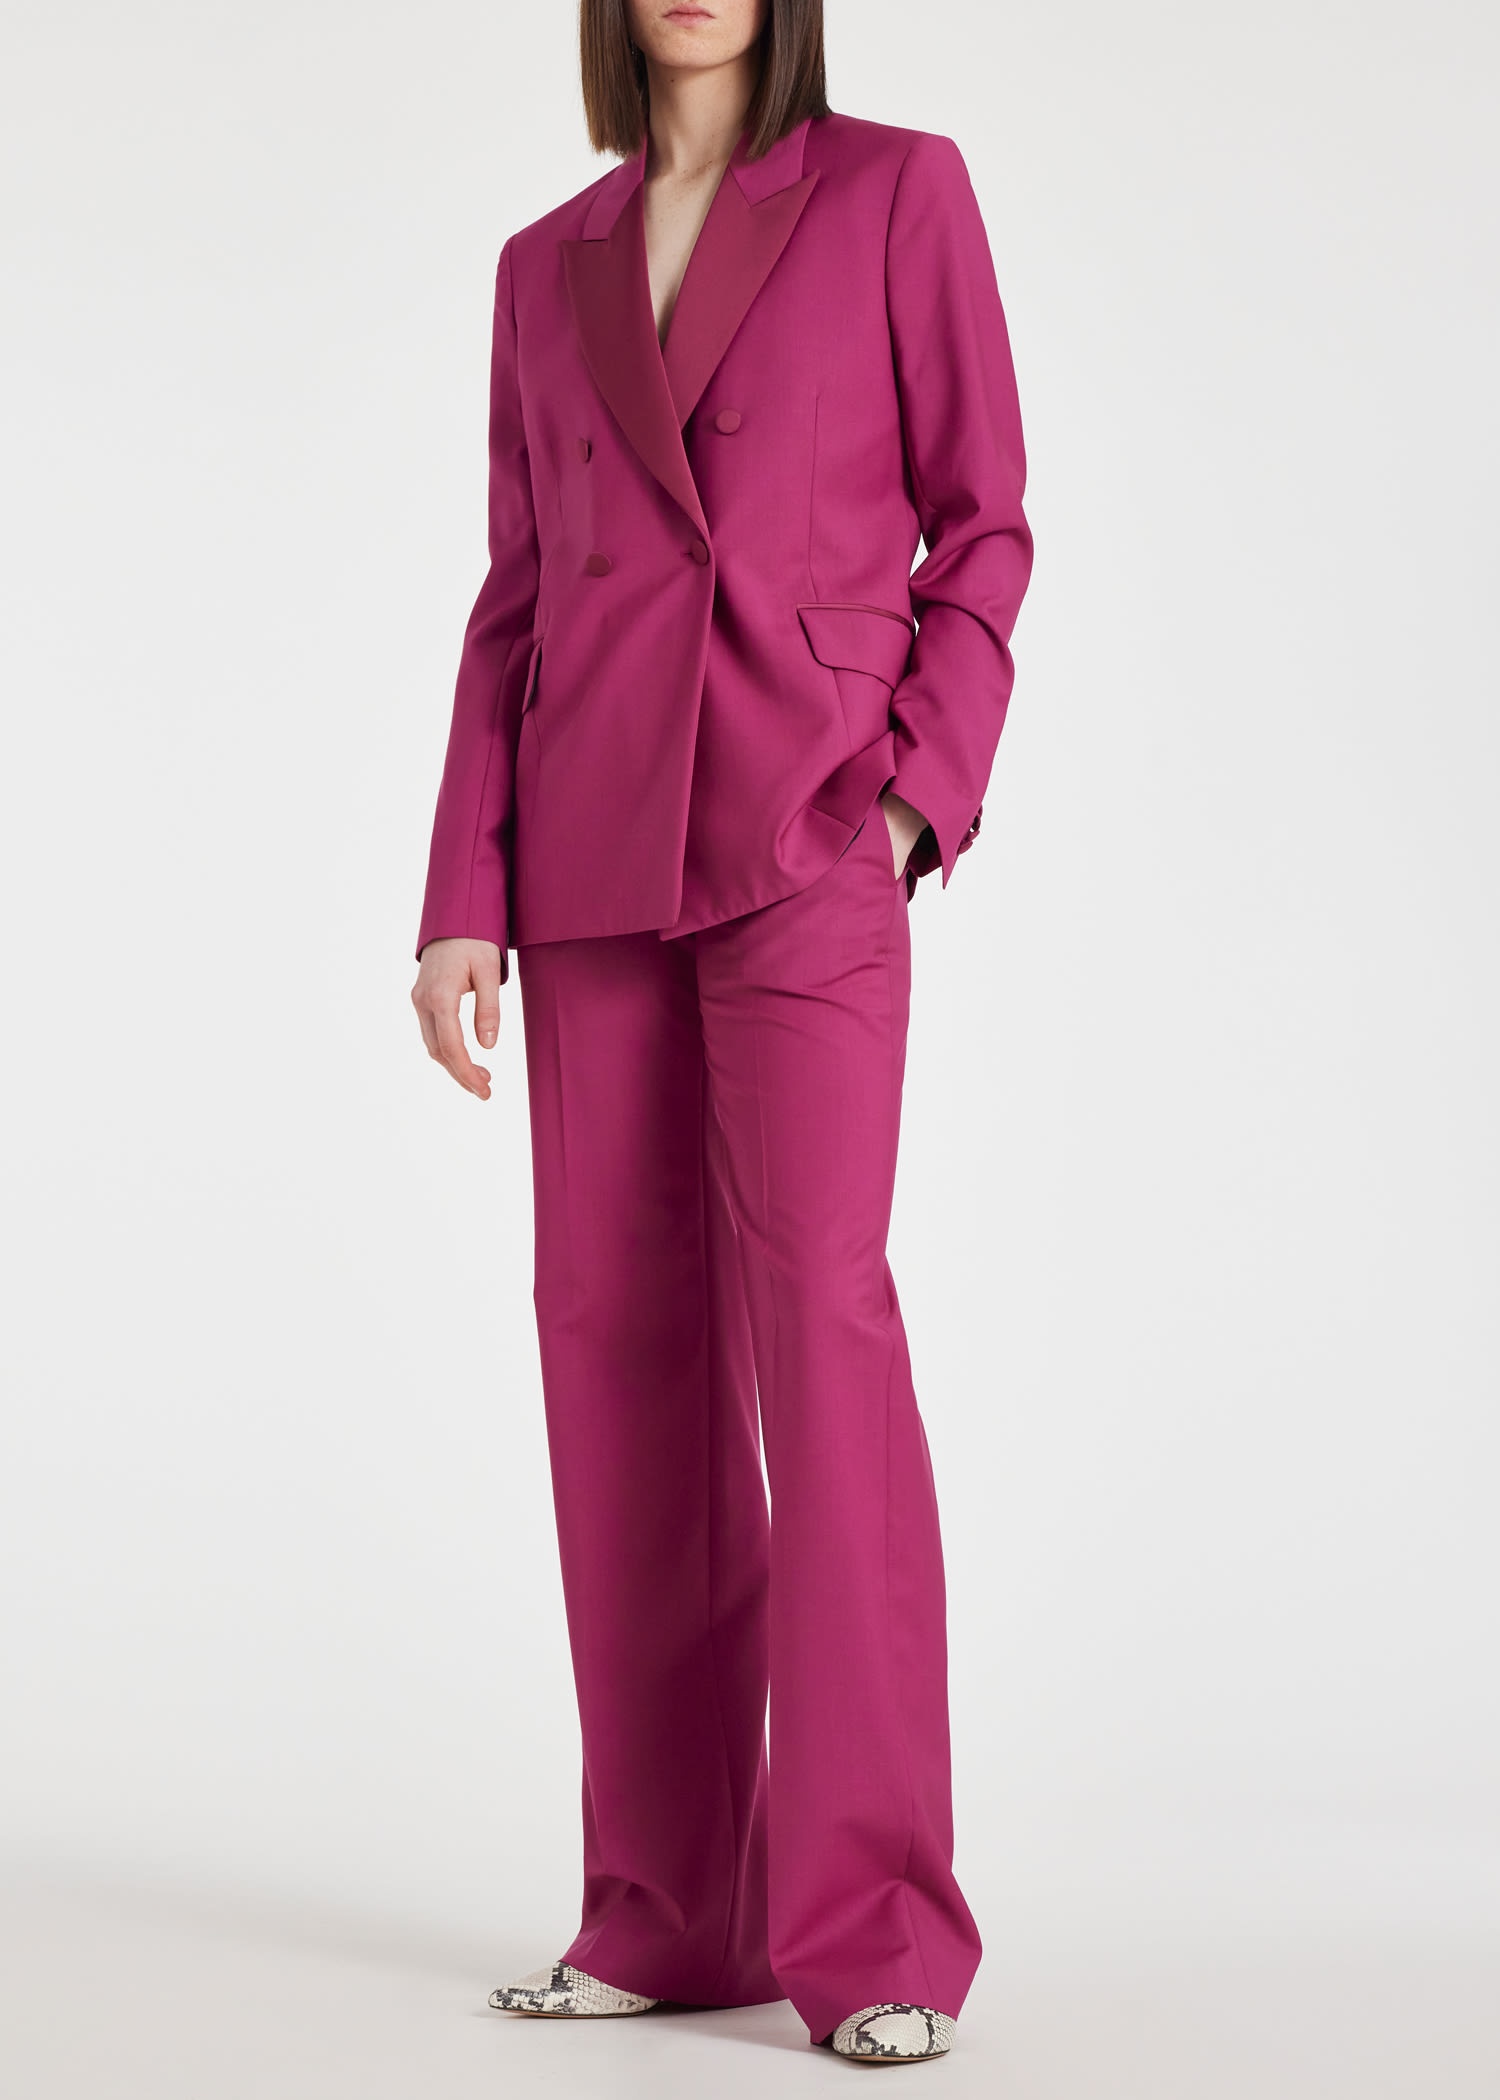 Magenta Wool-Mohair Double Breasted Suit - 8